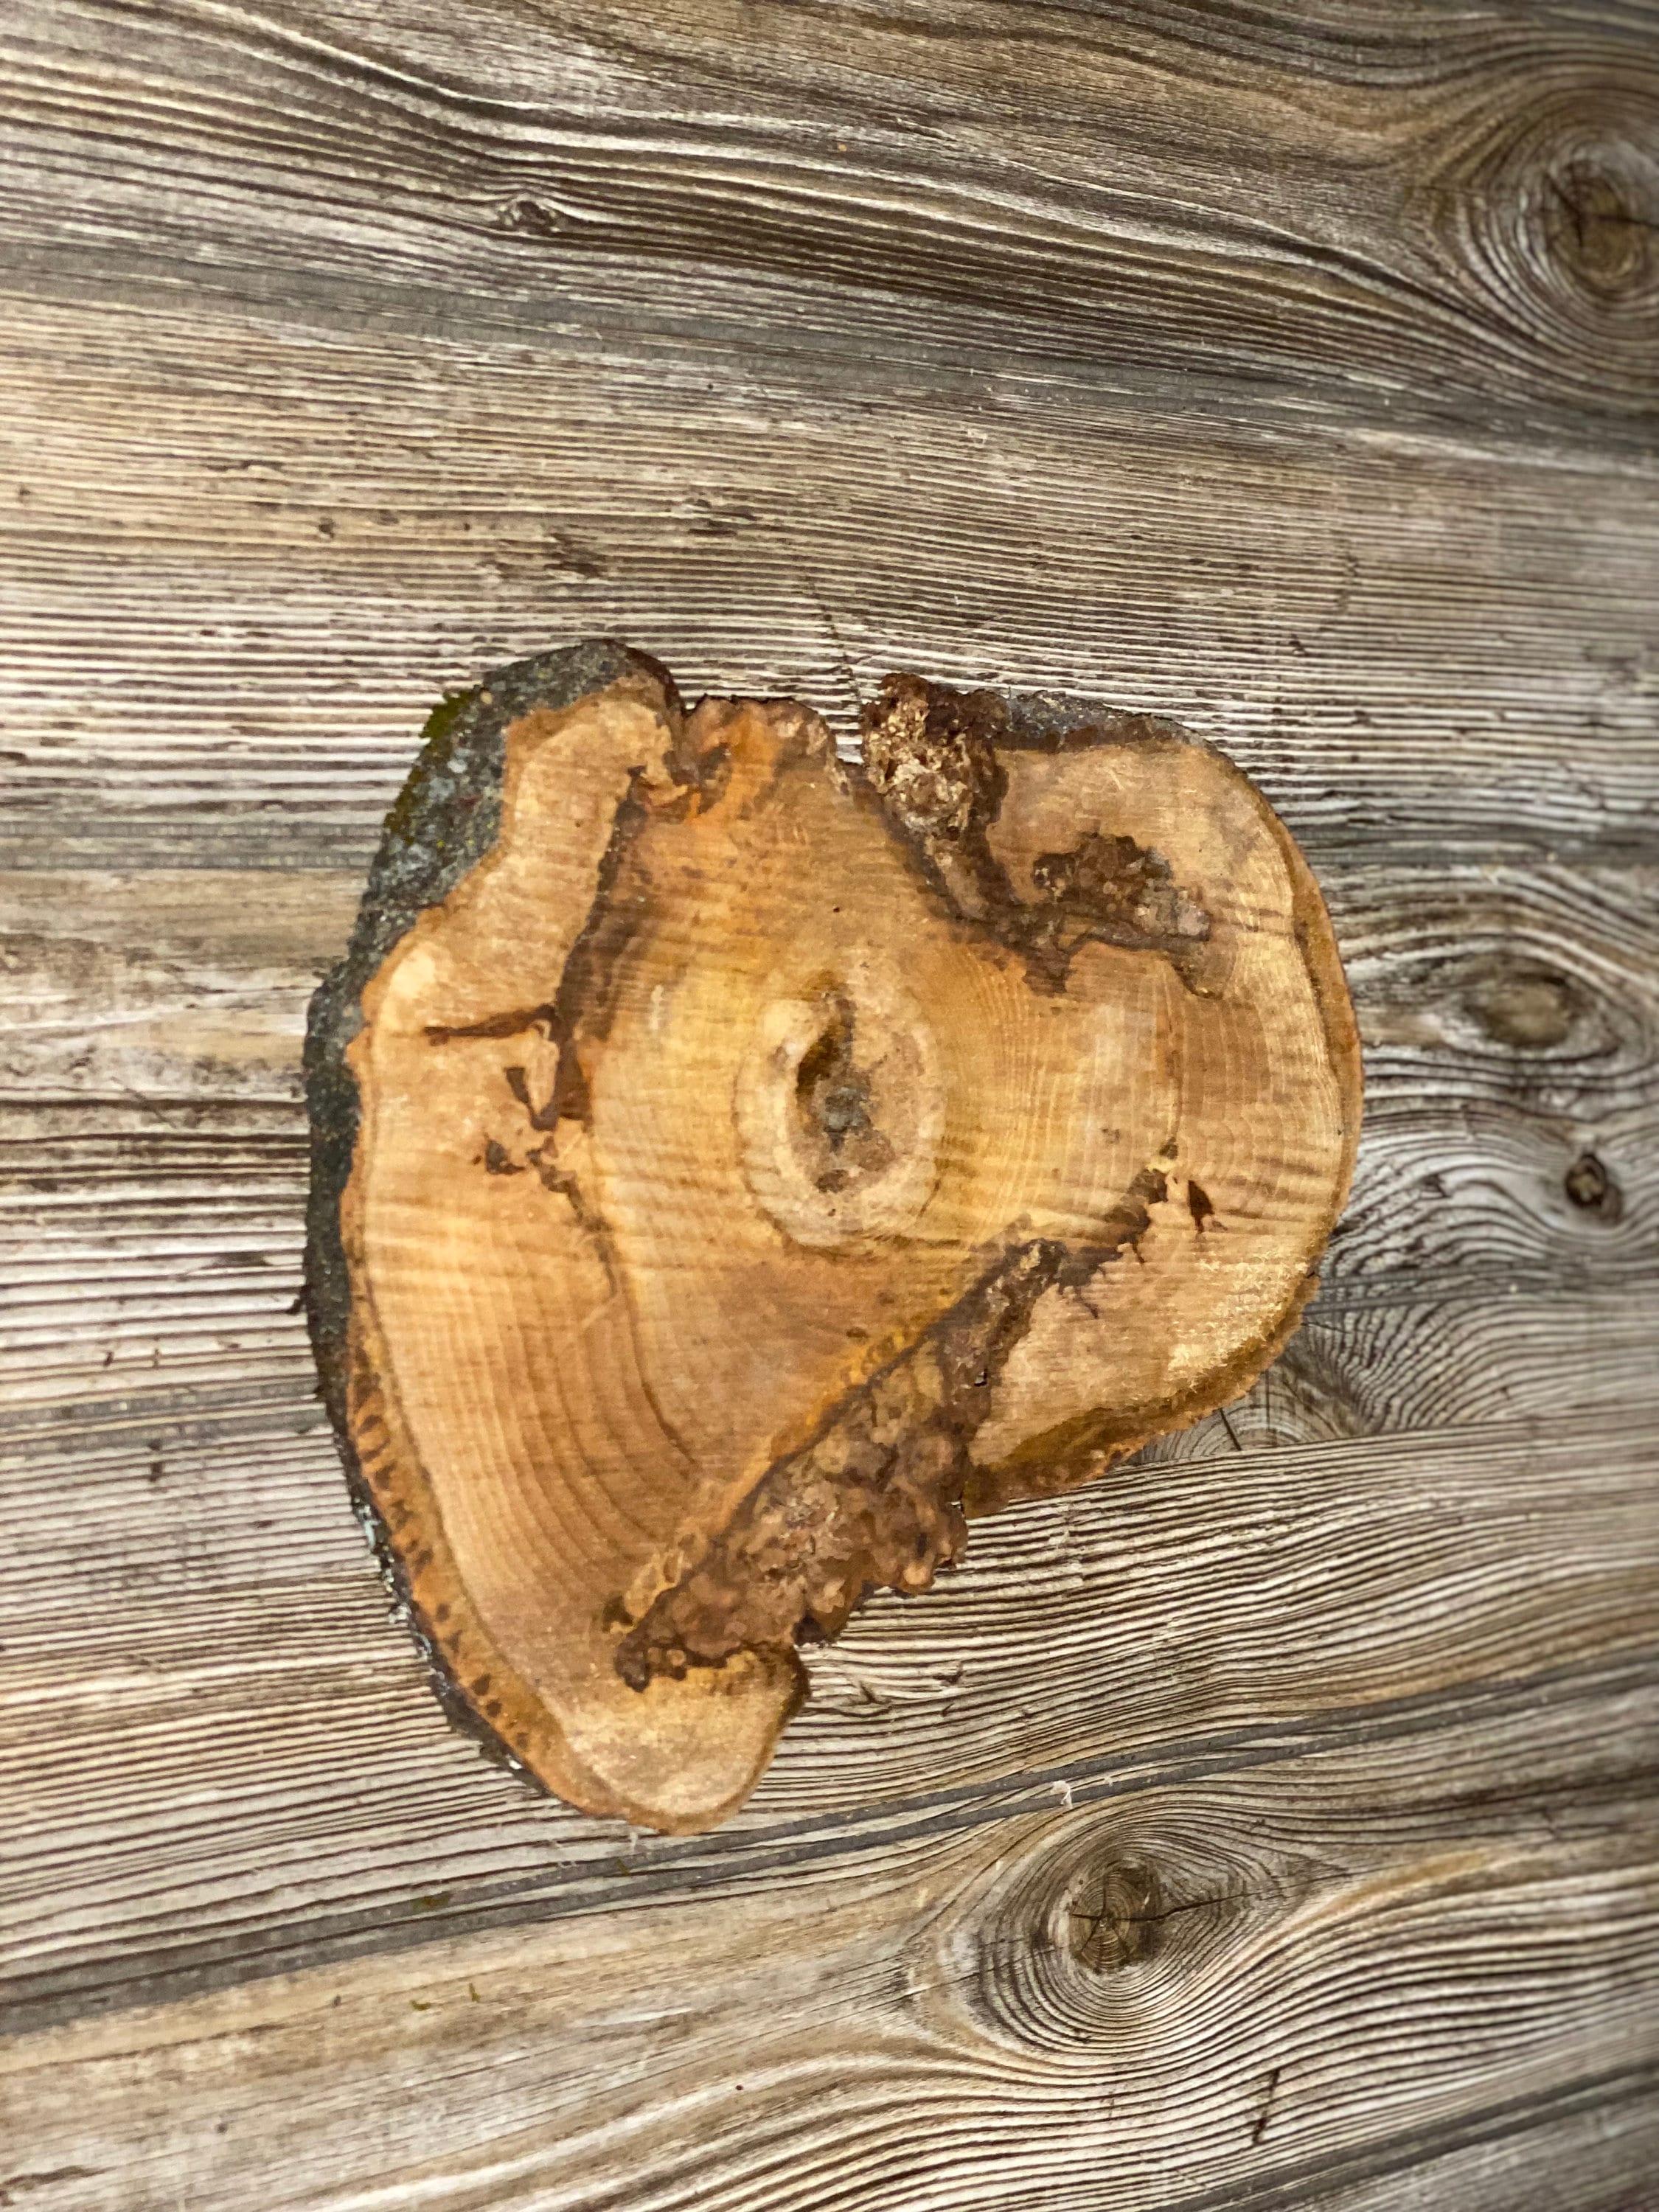 Hickory Burl Slice, Approximately 10 Inches Long by 9 Inches Wide and 3/4 Inch Thick